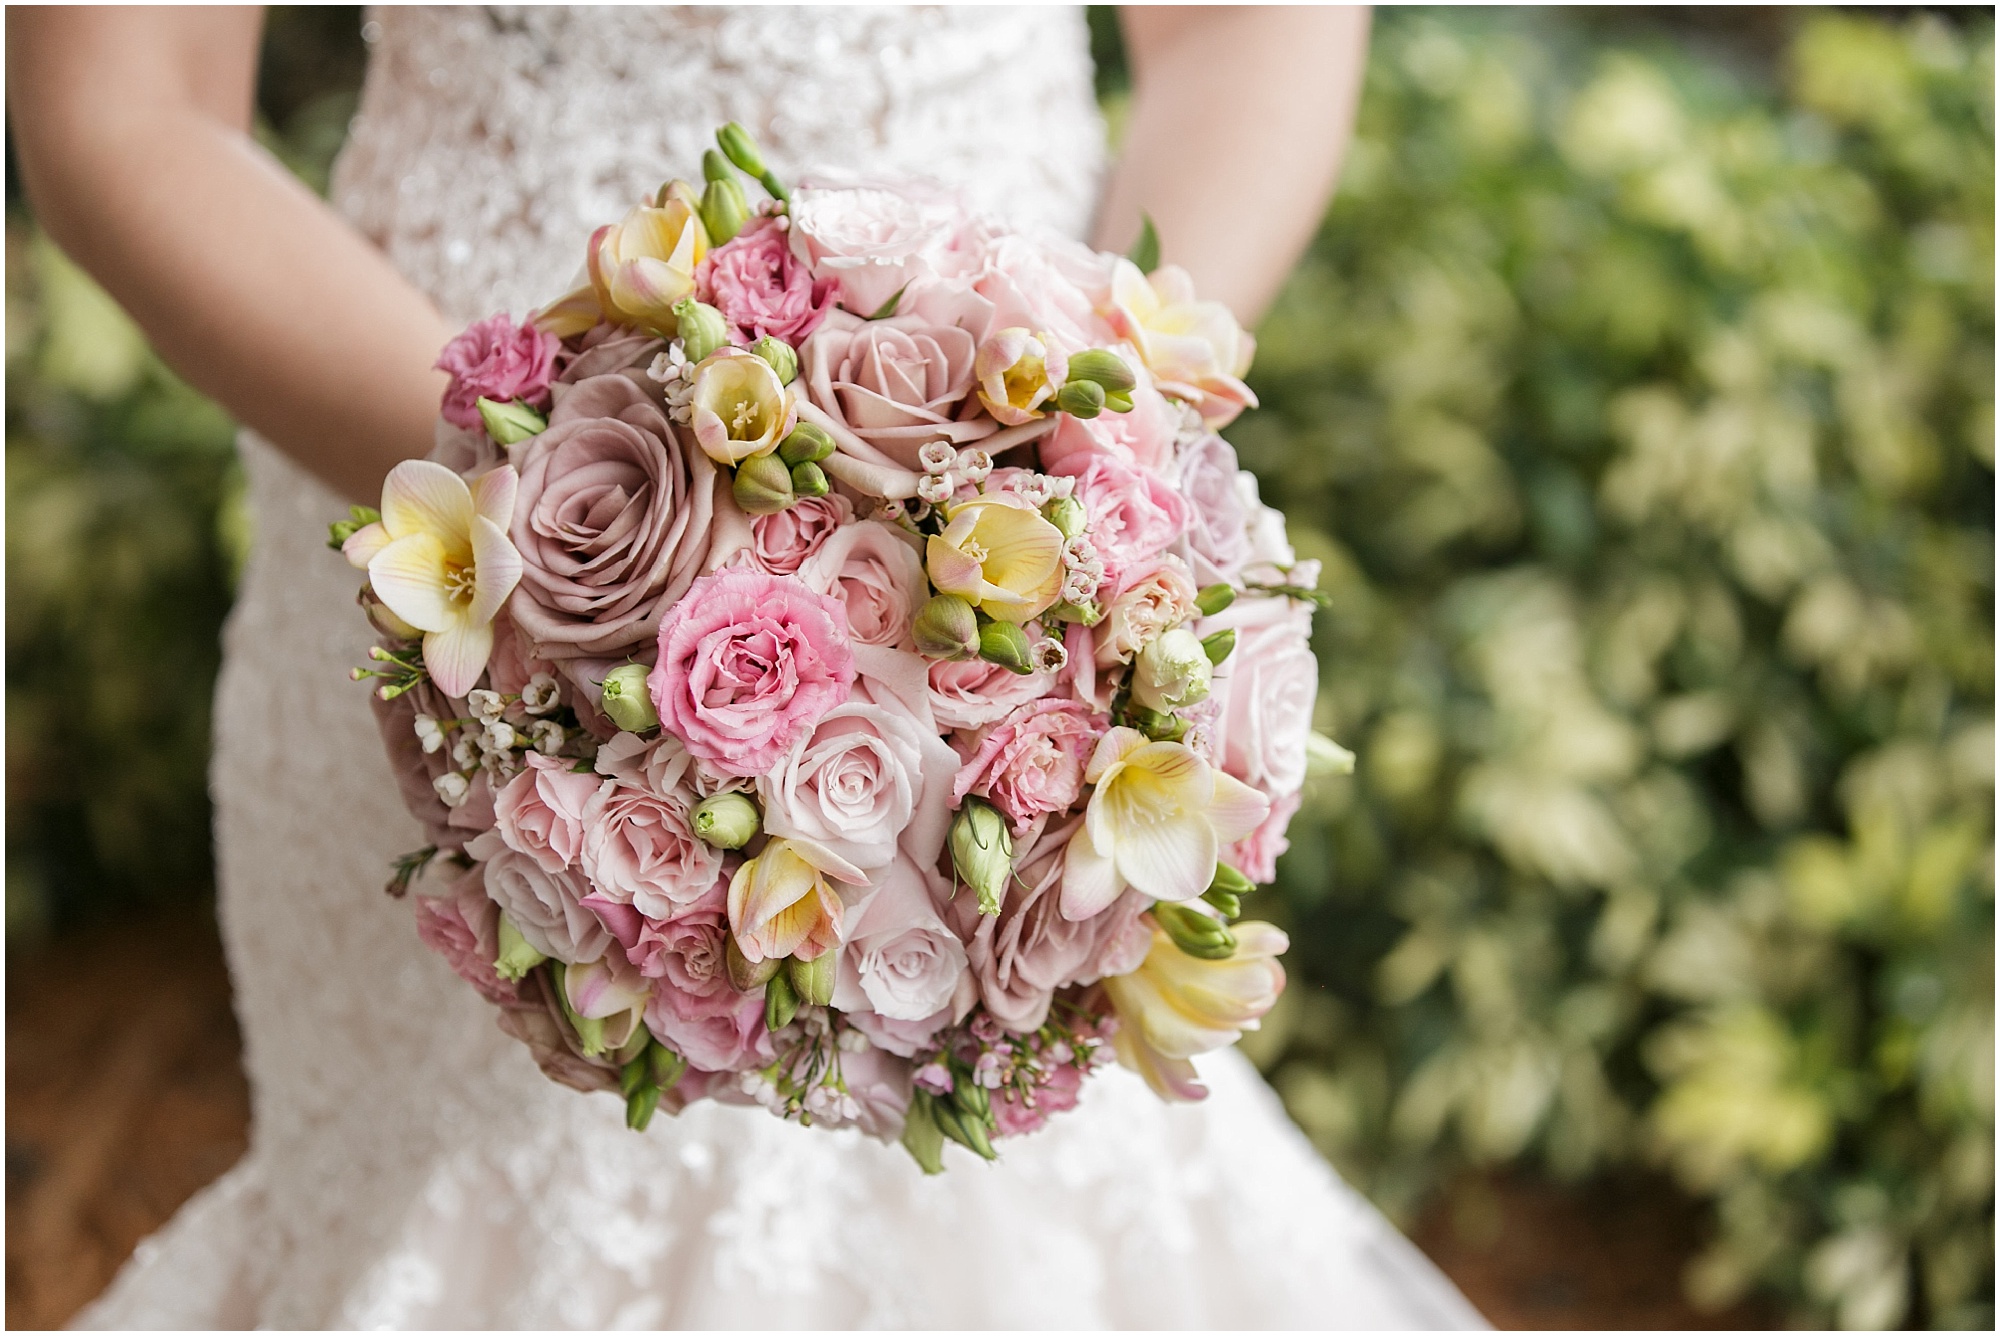 Classic shades of pink and blush floral wedding bouquet being held by the bride. 